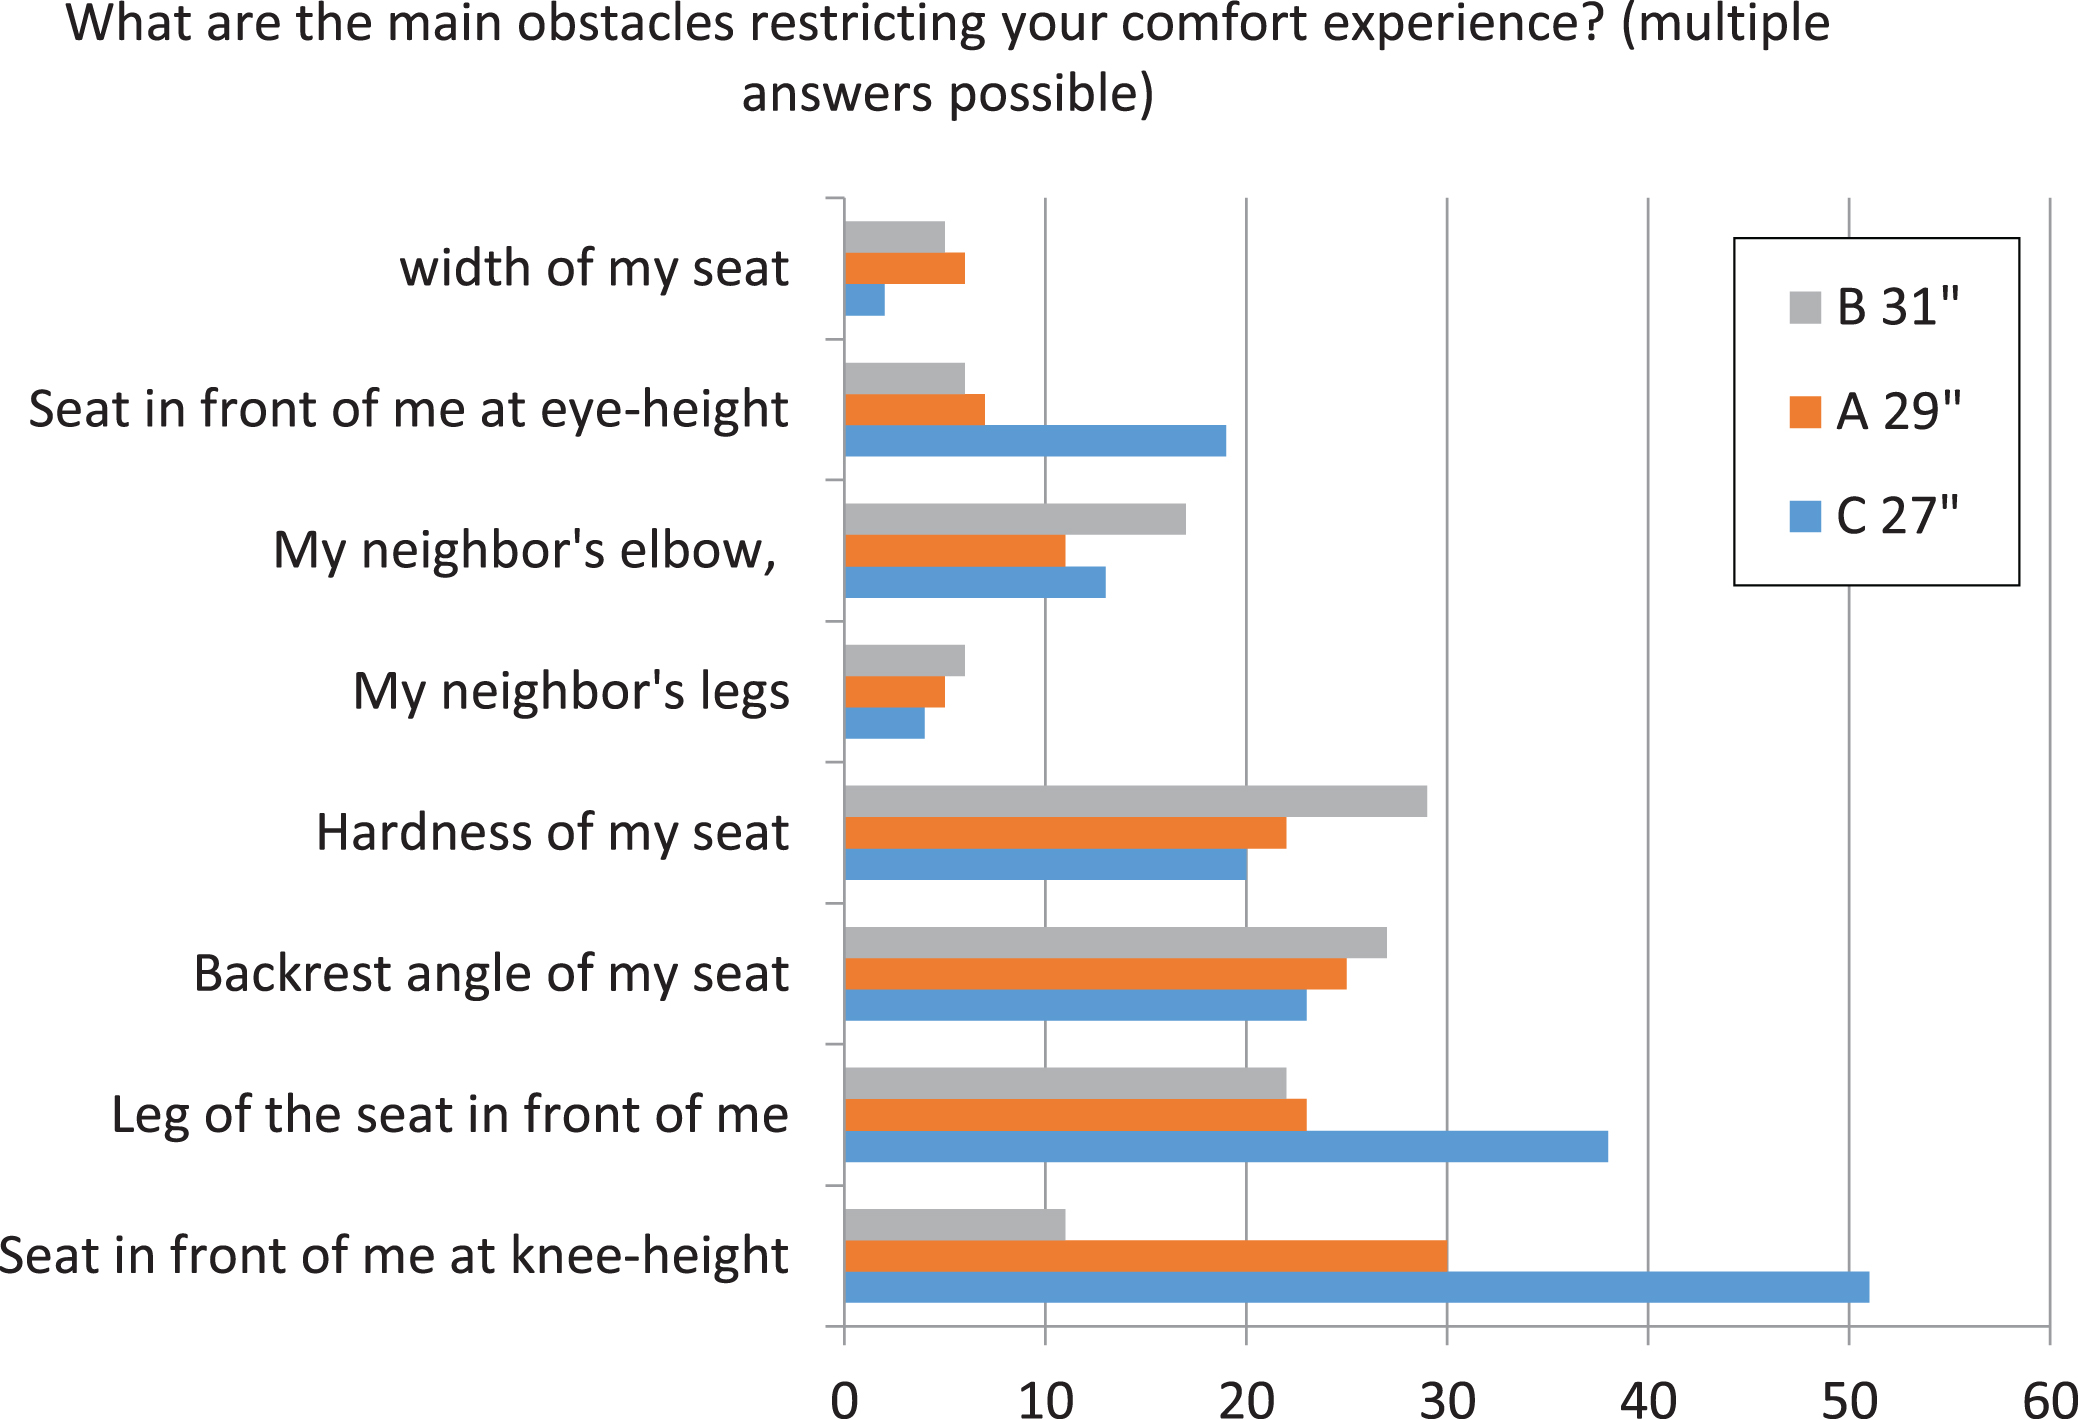 Number of participants out of 53 mentioning the problem as described in the figure for the three seats.